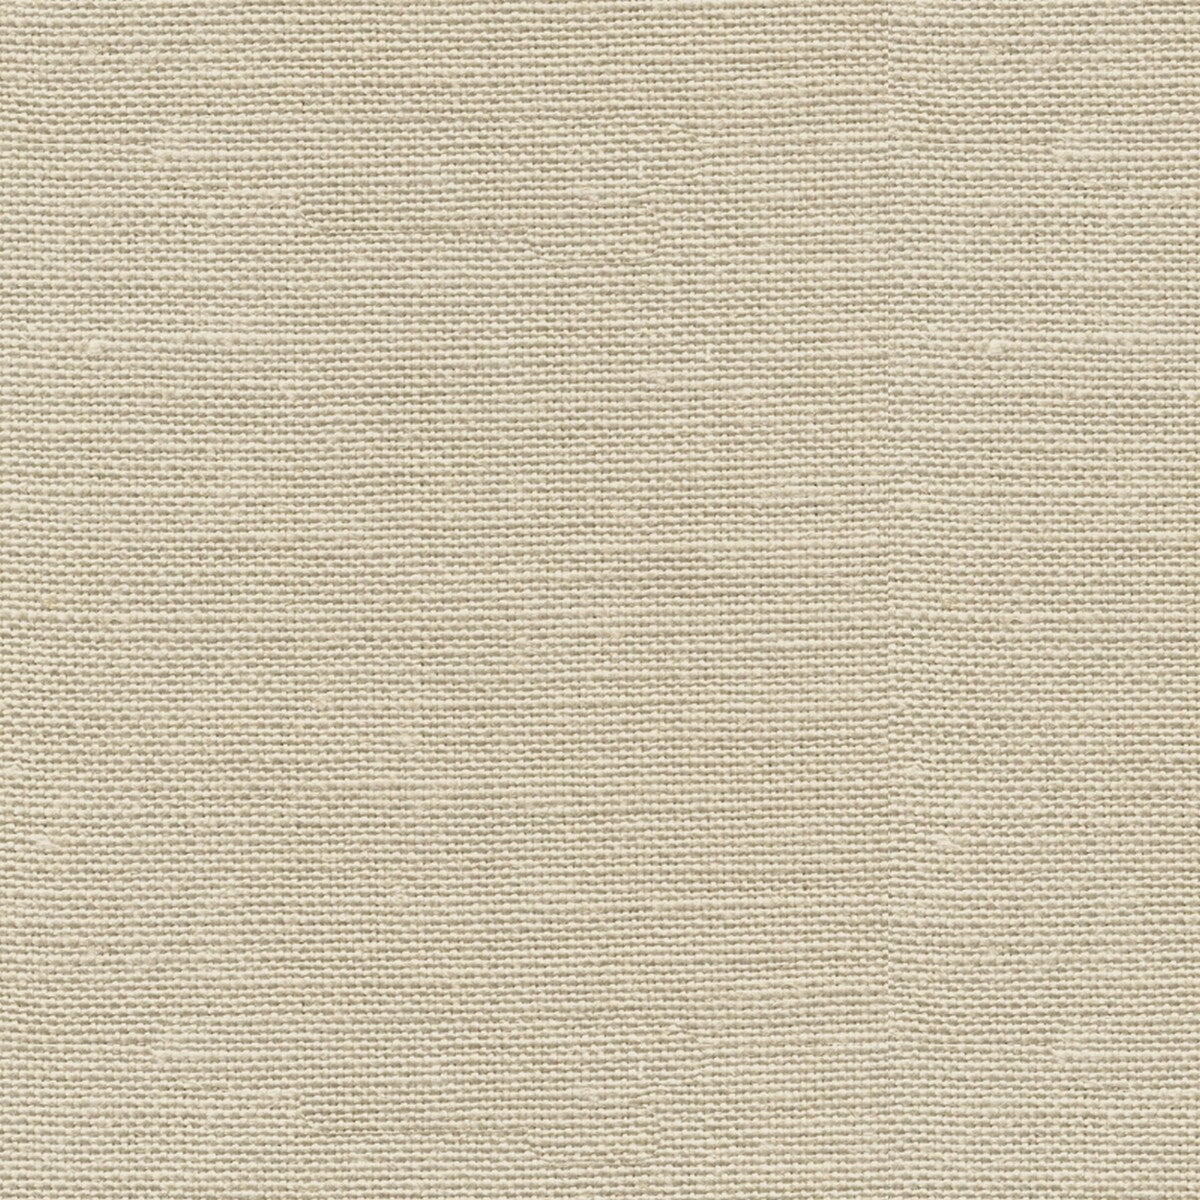 Newport fabric in stone color - pattern ED85116.115.0 - by Threads in the Threads Spring collection